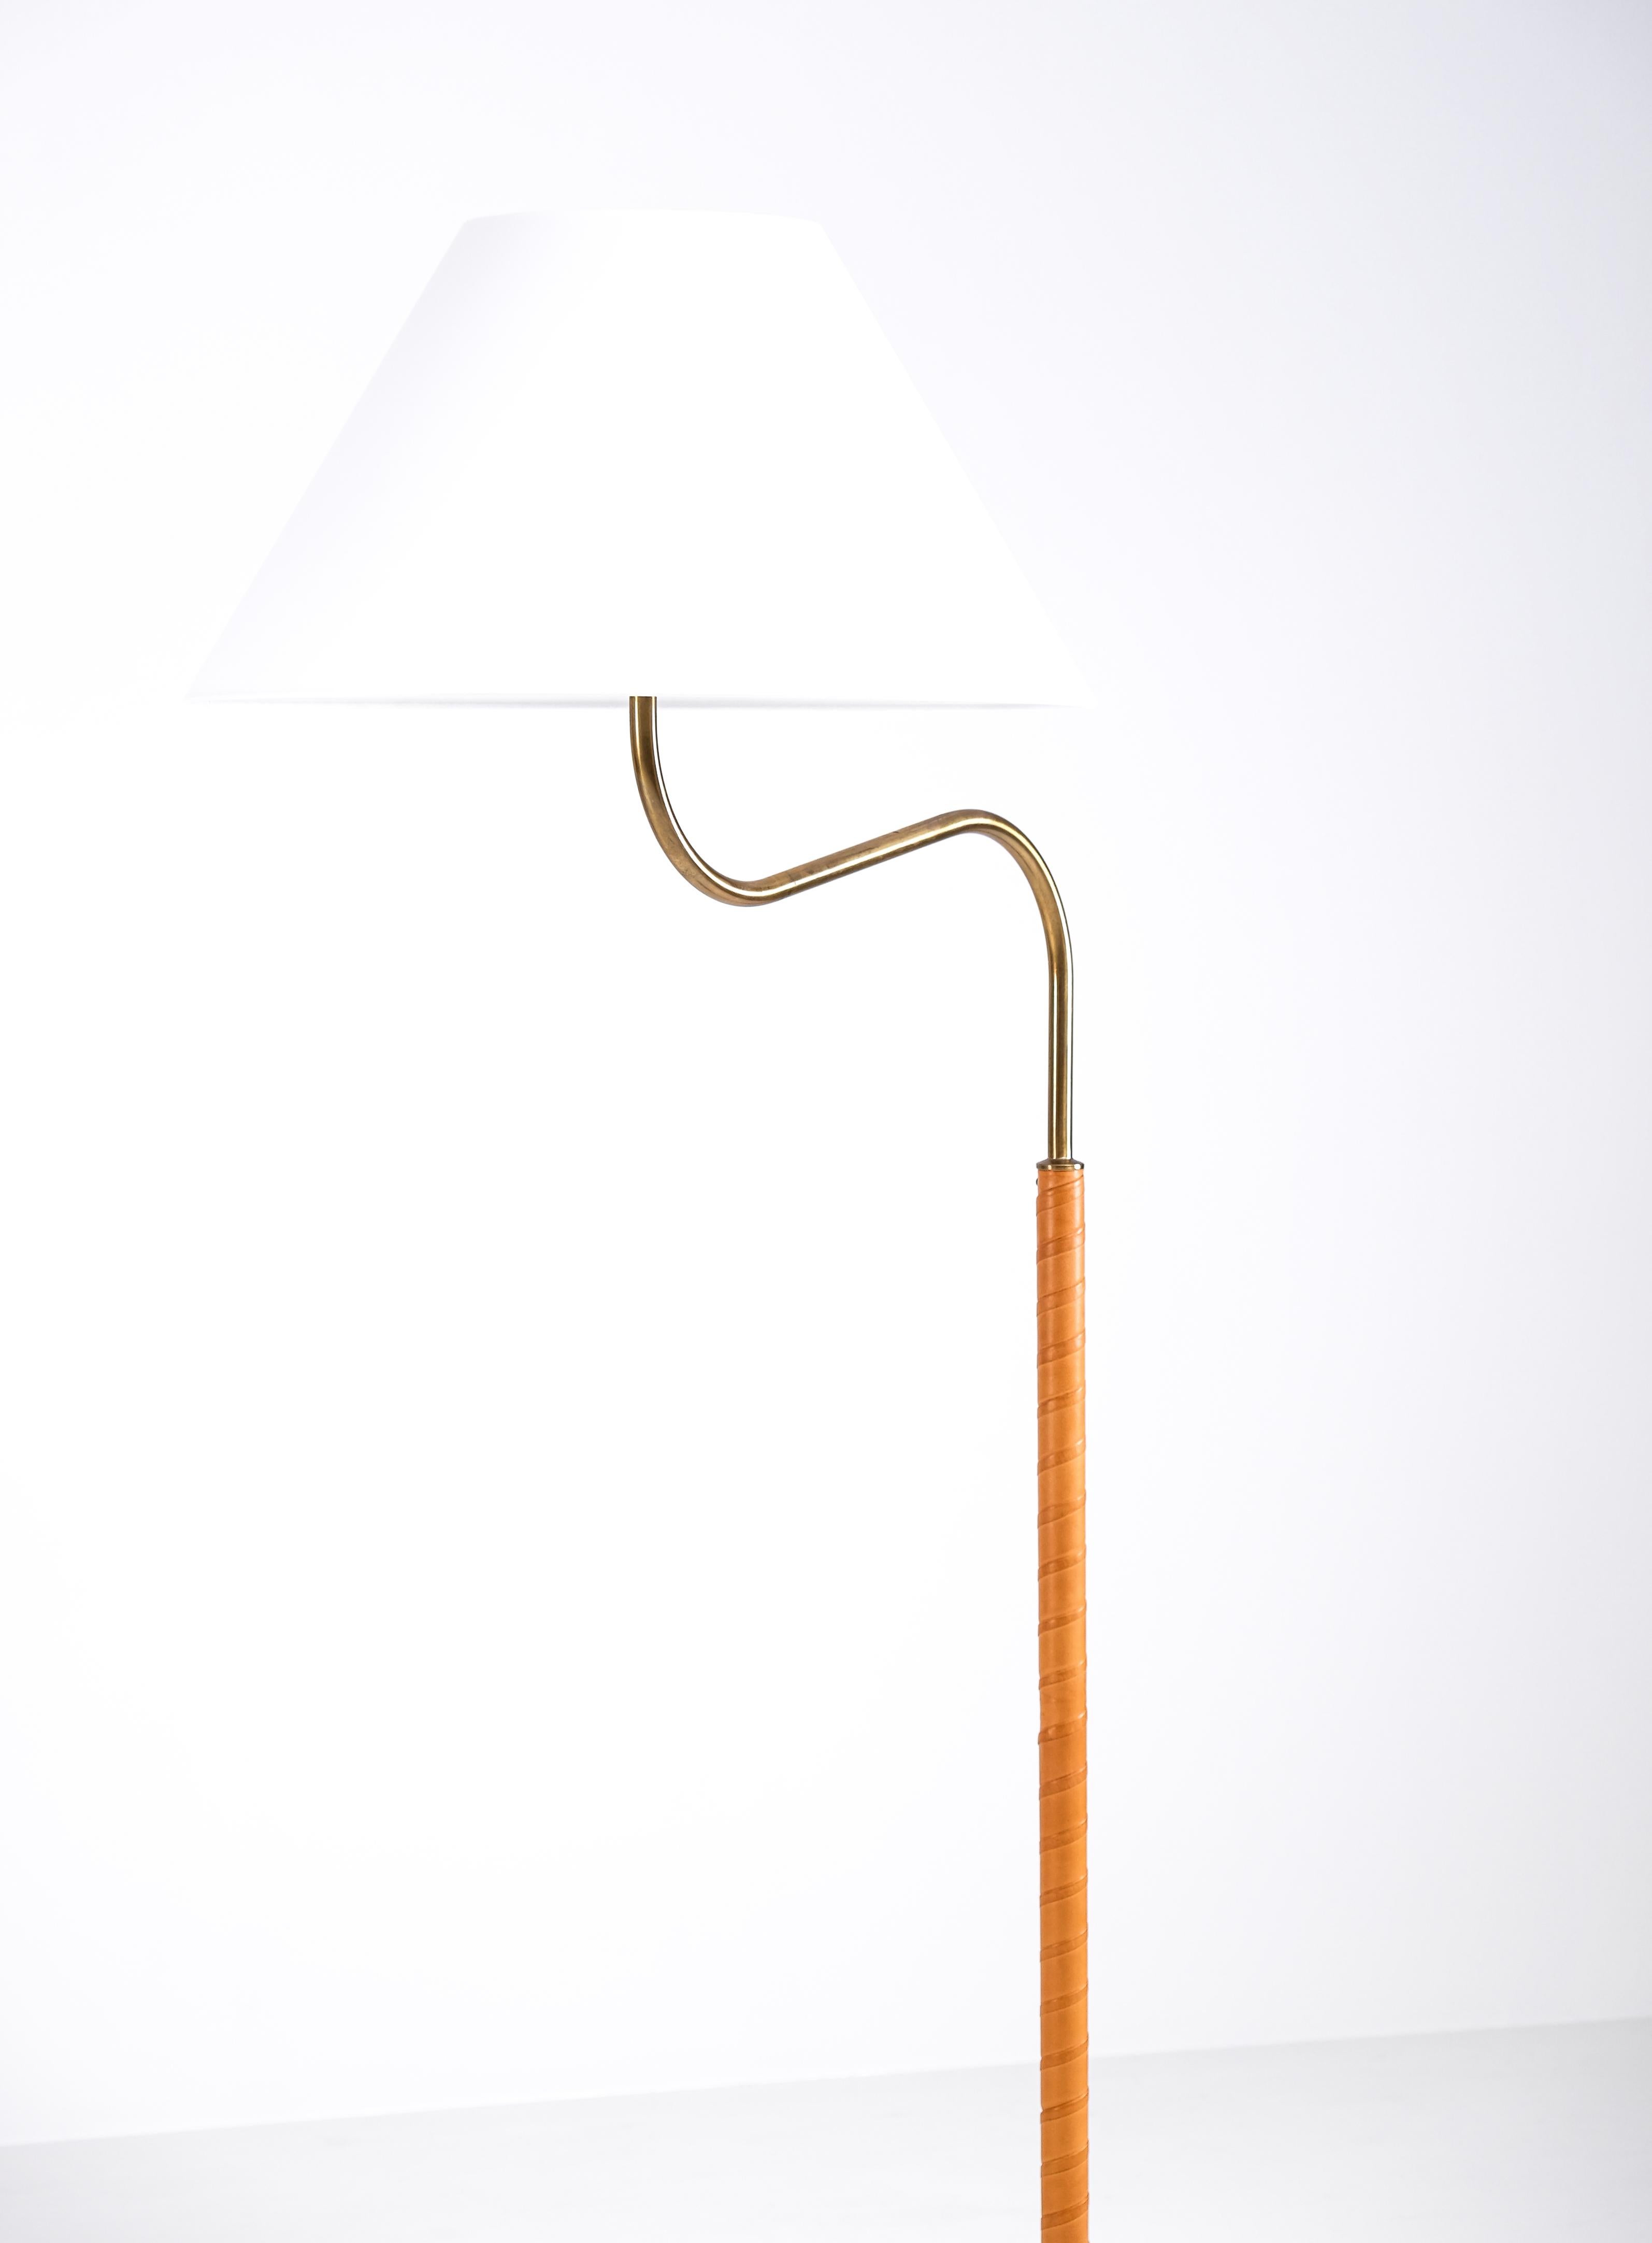 Swedish Pair of 'Large Camel' Floor Lamps by Josef Frank, Sweden, 1960s For Sale